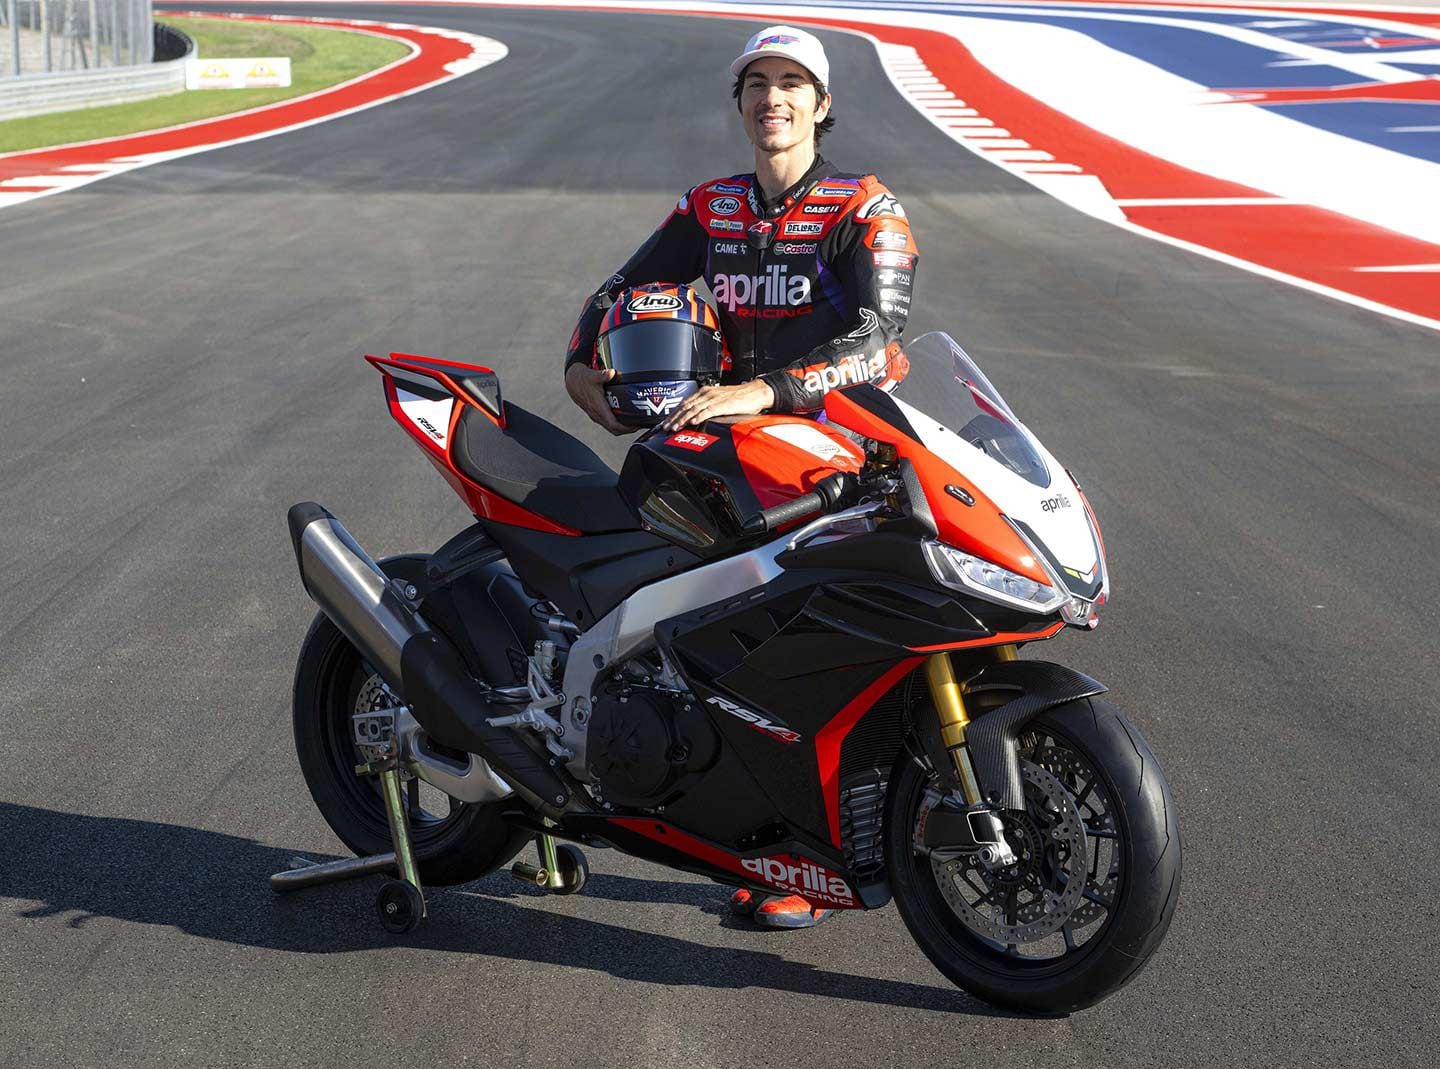 The special-edition RSV4 is meant as a celebration of the model’s first World Superbike win in 2009 with Max Biaggi at the helm. On this occasion, it’s Maverick Viñales providing the photo op.